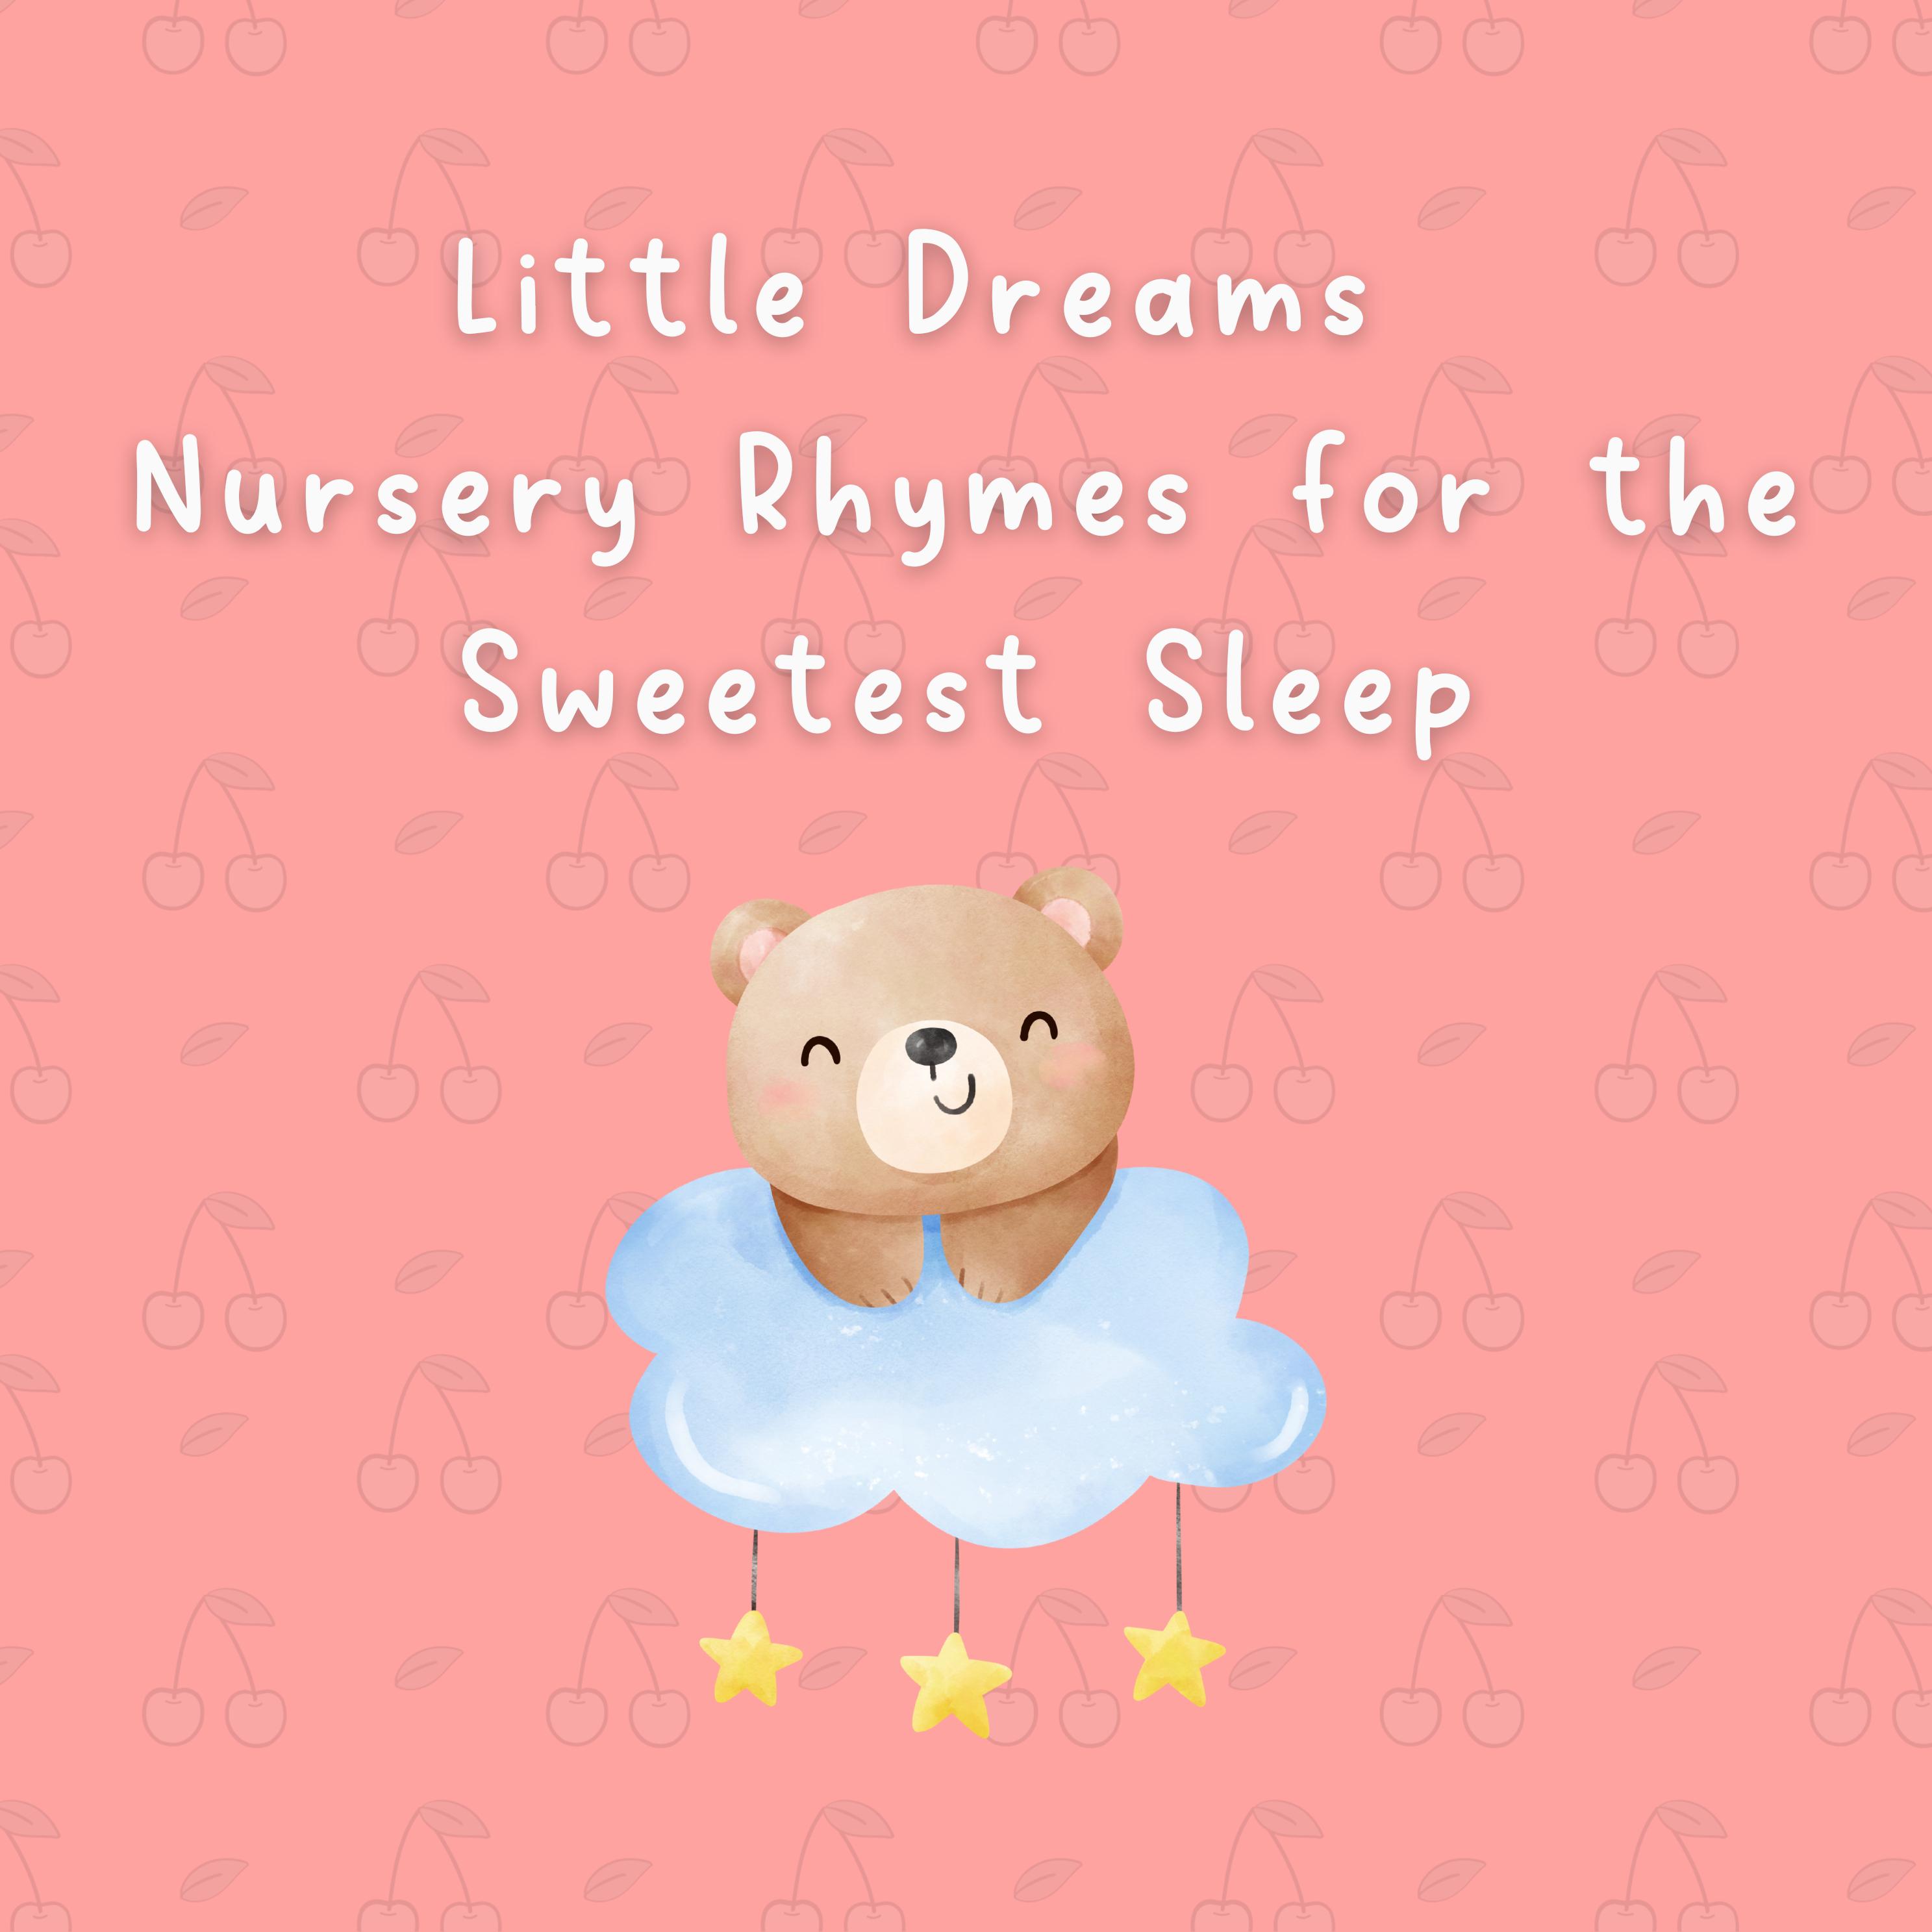 Baby Nap Time - The Wistful Willow's Weep (Nursery Rhymes to Help Baby Sleep)